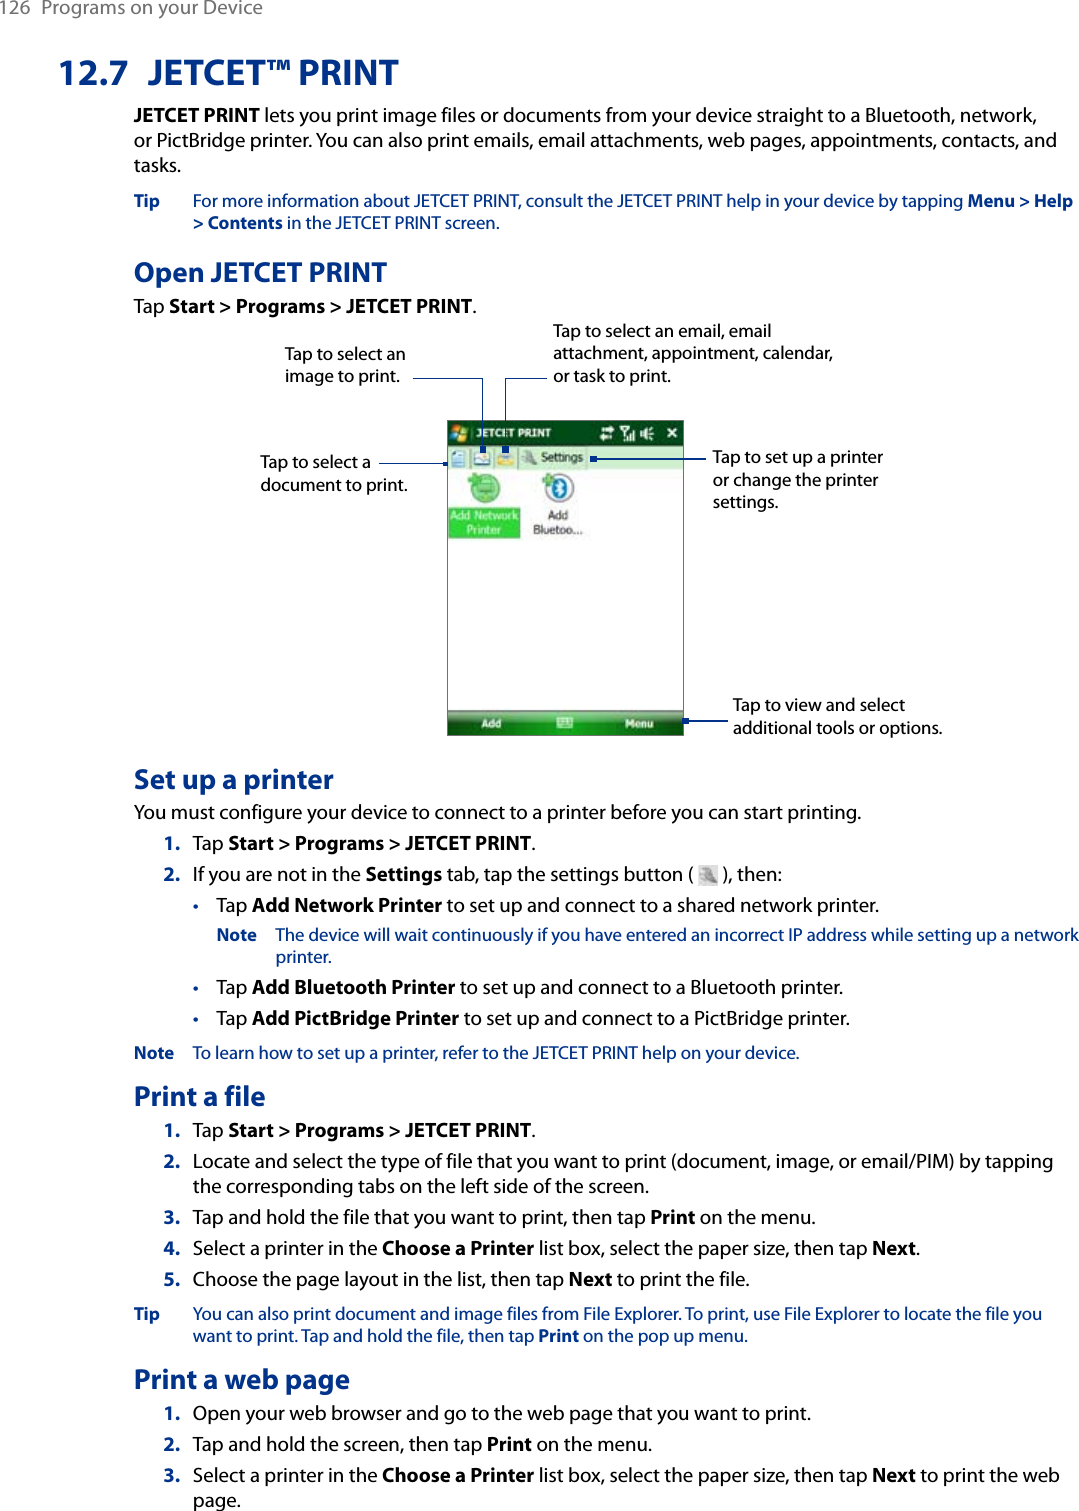 126  Programs on your Device12.7  JETCET™ PRINTJETCET PRINT lets you print image files or documents from your device straight to a Bluetooth, network, or PictBridge printer. You can also print emails, email attachments, web pages, appointments, contacts, and tasks.Tip  For more information about JETCET PRINT, consult the JETCET PRINT help in your device by tapping Menu &gt; Help &gt; Contents in the JETCET PRINT screen.Open JETCET PRINTTap Start &gt; Programs &gt; JETCET PRINT.Tap to select a document to print.Tap to view and select additional tools or options.Tap to select an image to print.Tap to select an email, email attachment, appointment, calendar, or task to print.Tap to set up a printer or change the printer settings.Set up a printerYou must configure your device to connect to a printer before you can start printing.Tap Start &gt; Programs &gt; JETCET PRINT.If you are not in the Settings tab, tap the settings button (   ), then:Tap Add Network Printer to set up and connect to a shared network printer.Note  The device will wait continuously if you have entered an incorrect IP address while setting up a network printer.Tap Add Bluetooth Printer to set up and connect to a Bluetooth printer.Tap Add PictBridge Printer to set up and connect to a PictBridge printer.Note  To learn how to set up a printer, refer to the JETCET PRINT help on your device.Print a fileTap Start &gt; Programs &gt; JETCET PRINT.Locate and select the type of file that you want to print (document, image, or email/PIM) by tapping the corresponding tabs on the left side of the screen.Tap and hold the file that you want to print, then tap Print on the menu.Select a printer in the Choose a Printer list box, select the paper size, then tap Next.Choose the page layout in the list, then tap Next to print the file.Tip  You can also print document and image files from File Explorer. To print, use File Explorer to locate the file you want to print. Tap and hold the file, then tap Print on the pop up menu.Print a web pageOpen your web browser and go to the web page that you want to print.Tap and hold the screen, then tap Print on the menu.Select a printer in the Choose a Printer list box, select the paper size, then tap Next to print the web page.1.2.•••1.2.3.4.5.1.2.3.